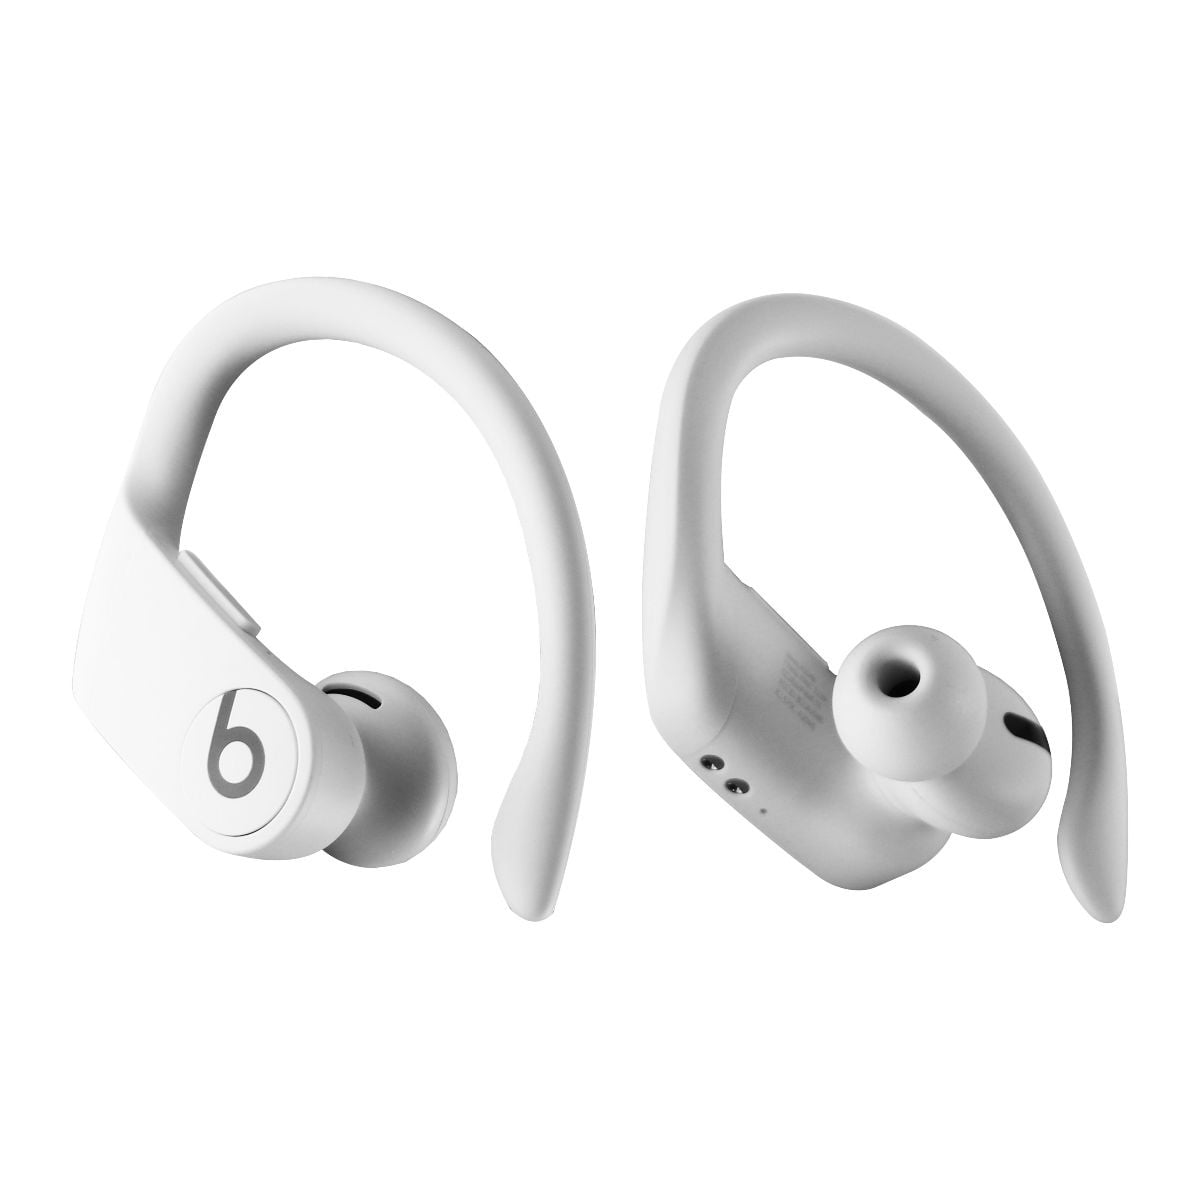 when are the ivory powerbeats pro coming out